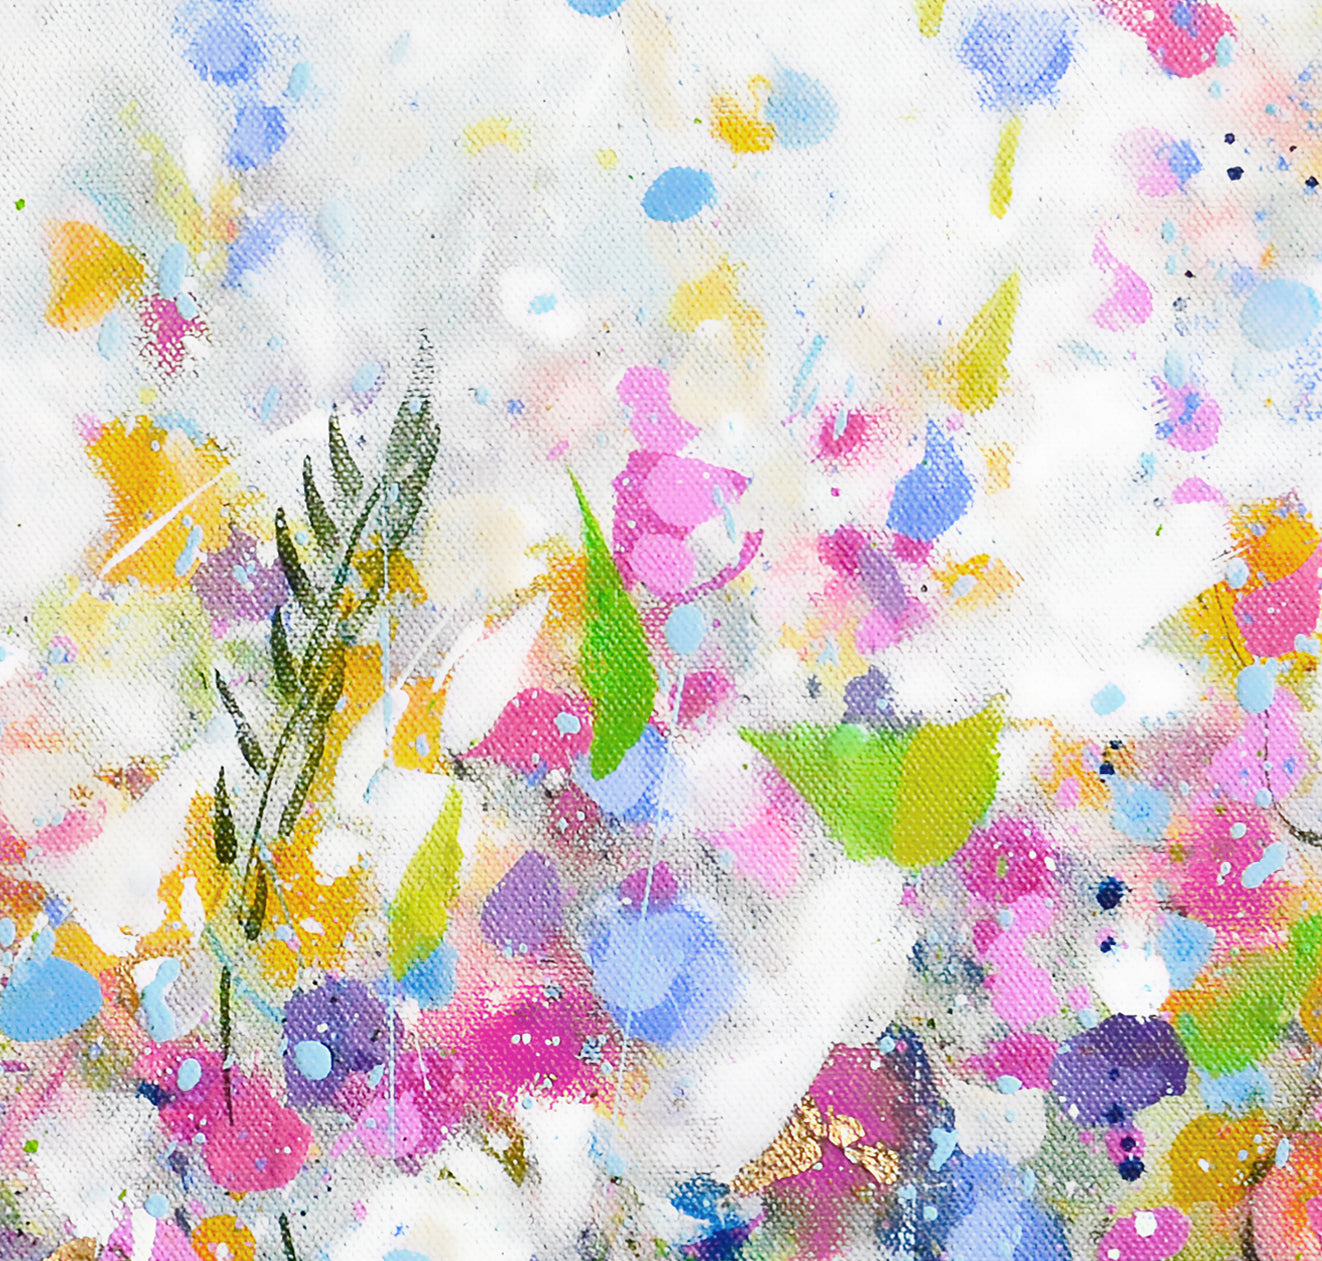 Pretty Floral Meadow Art Giclee Print on Stretched Canvas